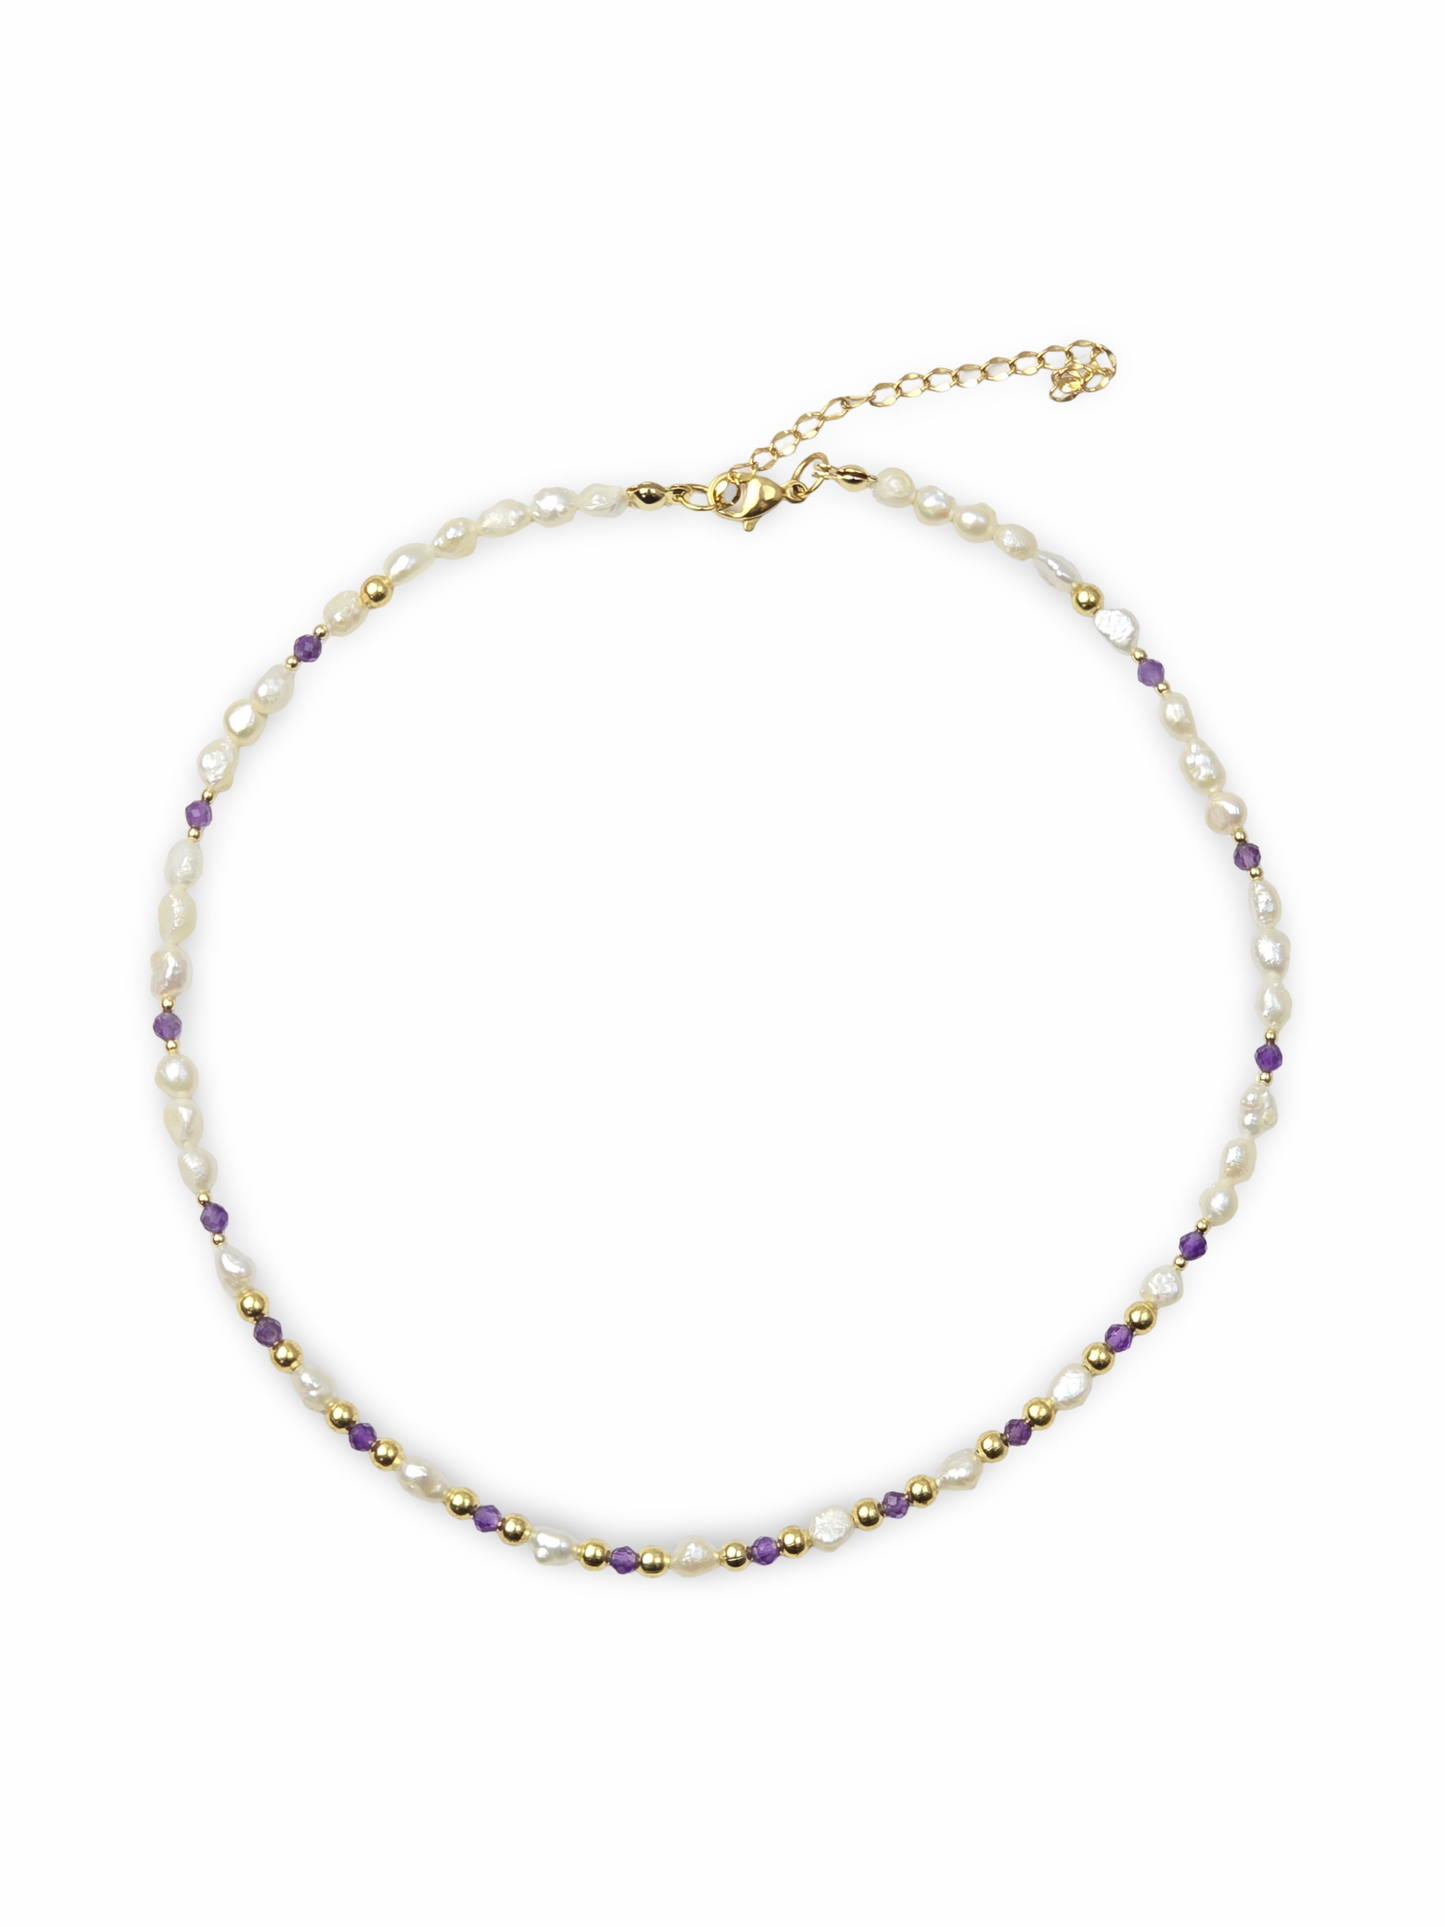 Divine Harmony: Natural Freshwater Pearls and Amethyst Choker